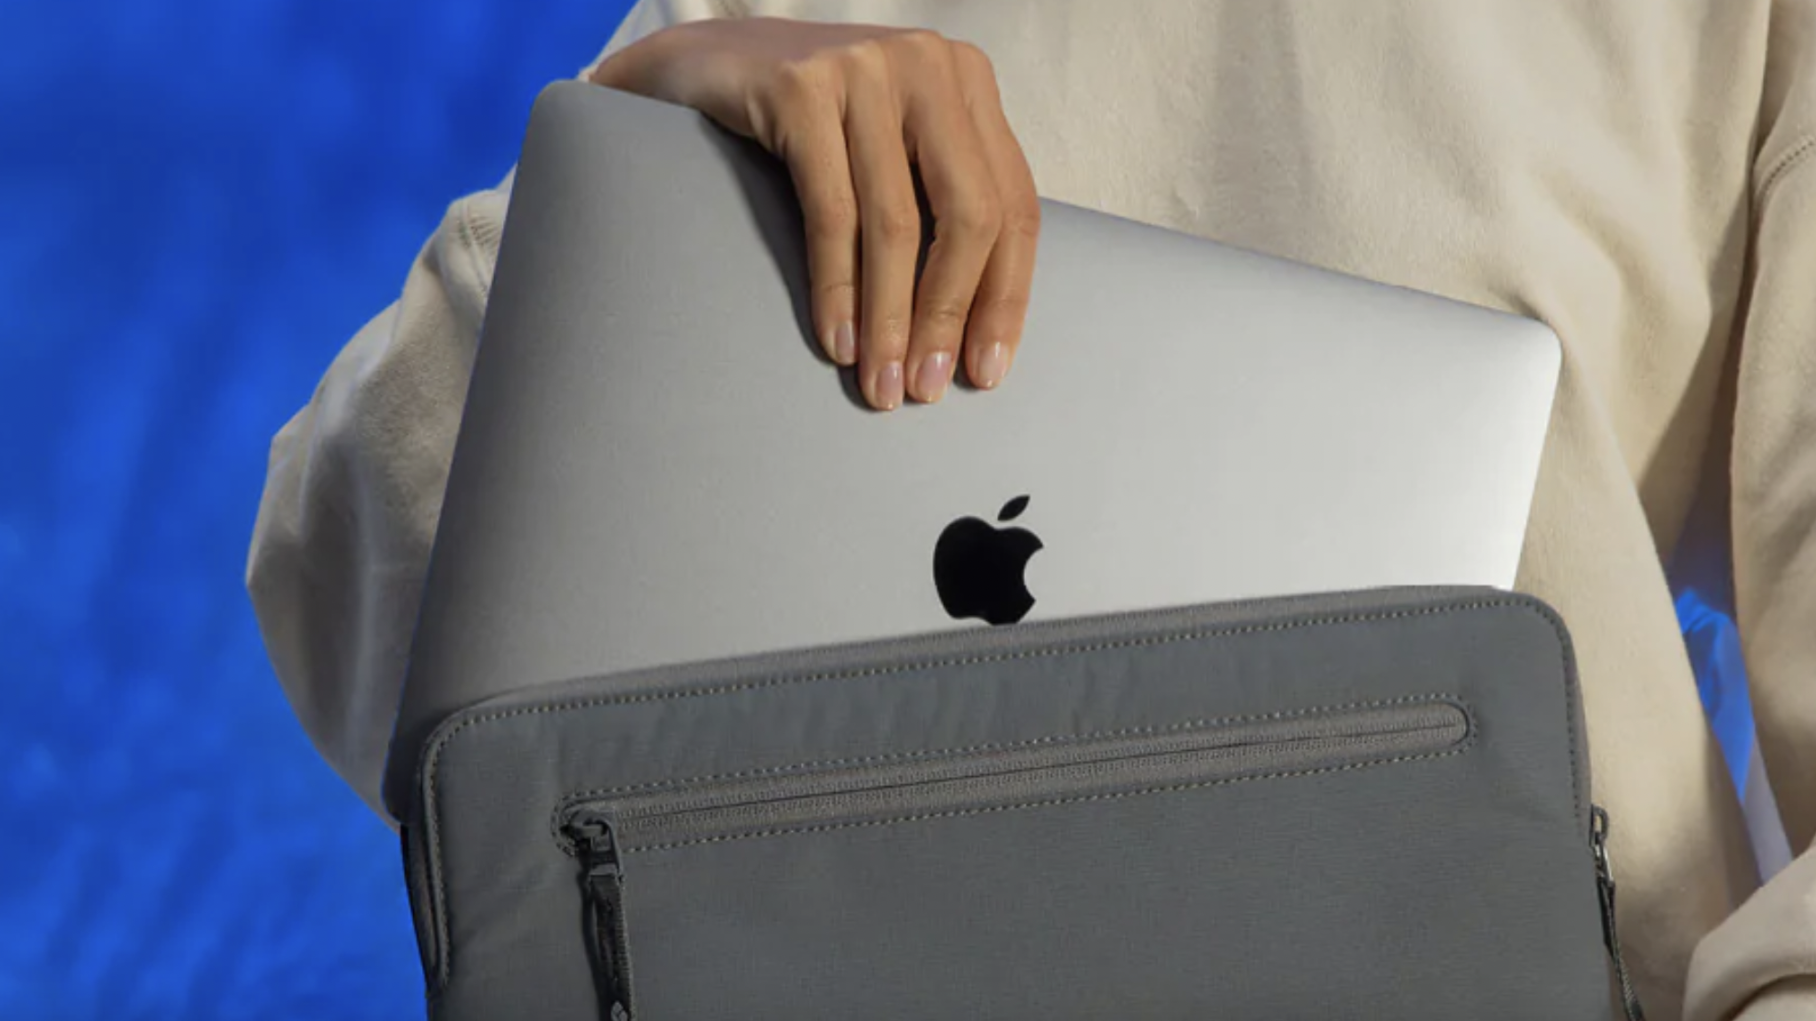 Best cases and sleeves for MacBook, MacBook Air, and Macbook Pro